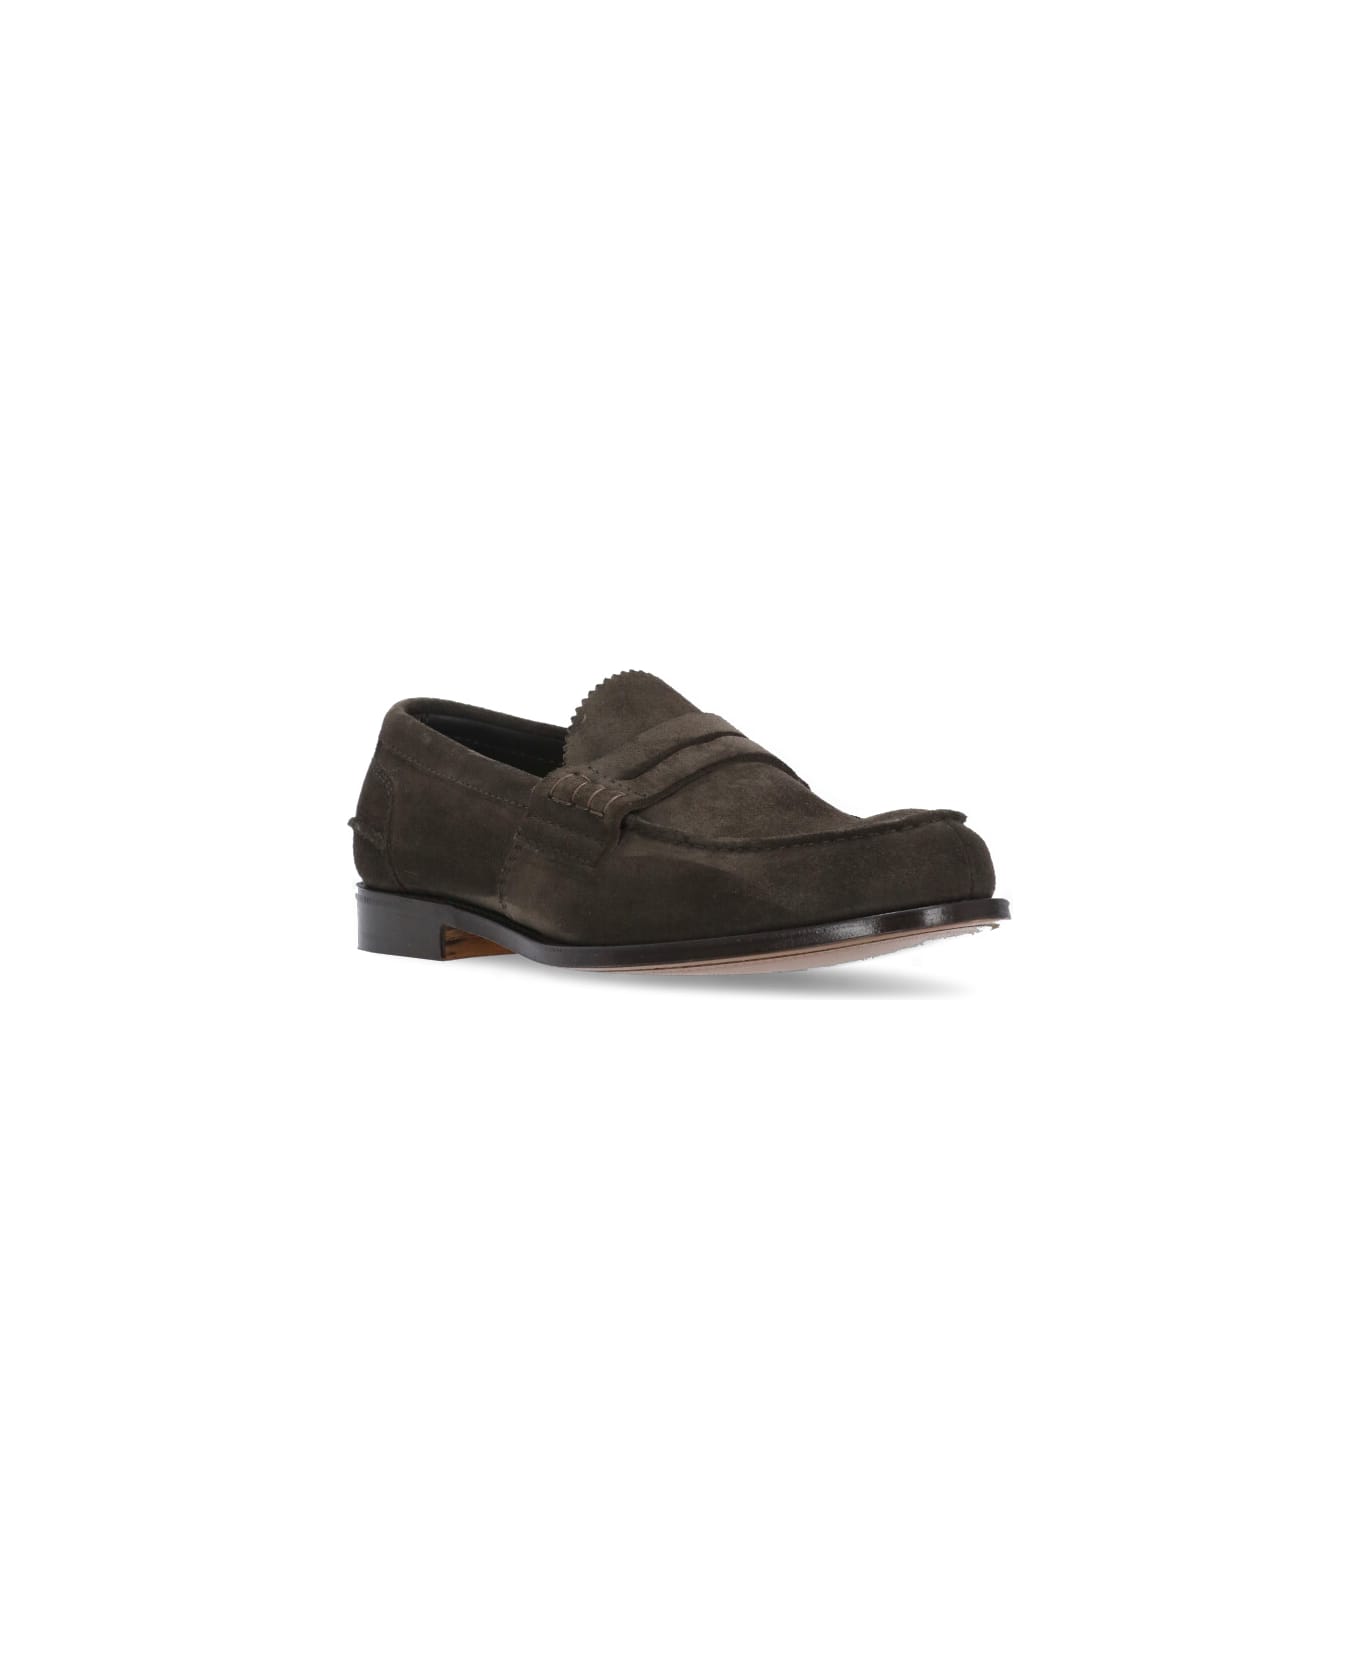 Church's Pembrey Loafers - Brown